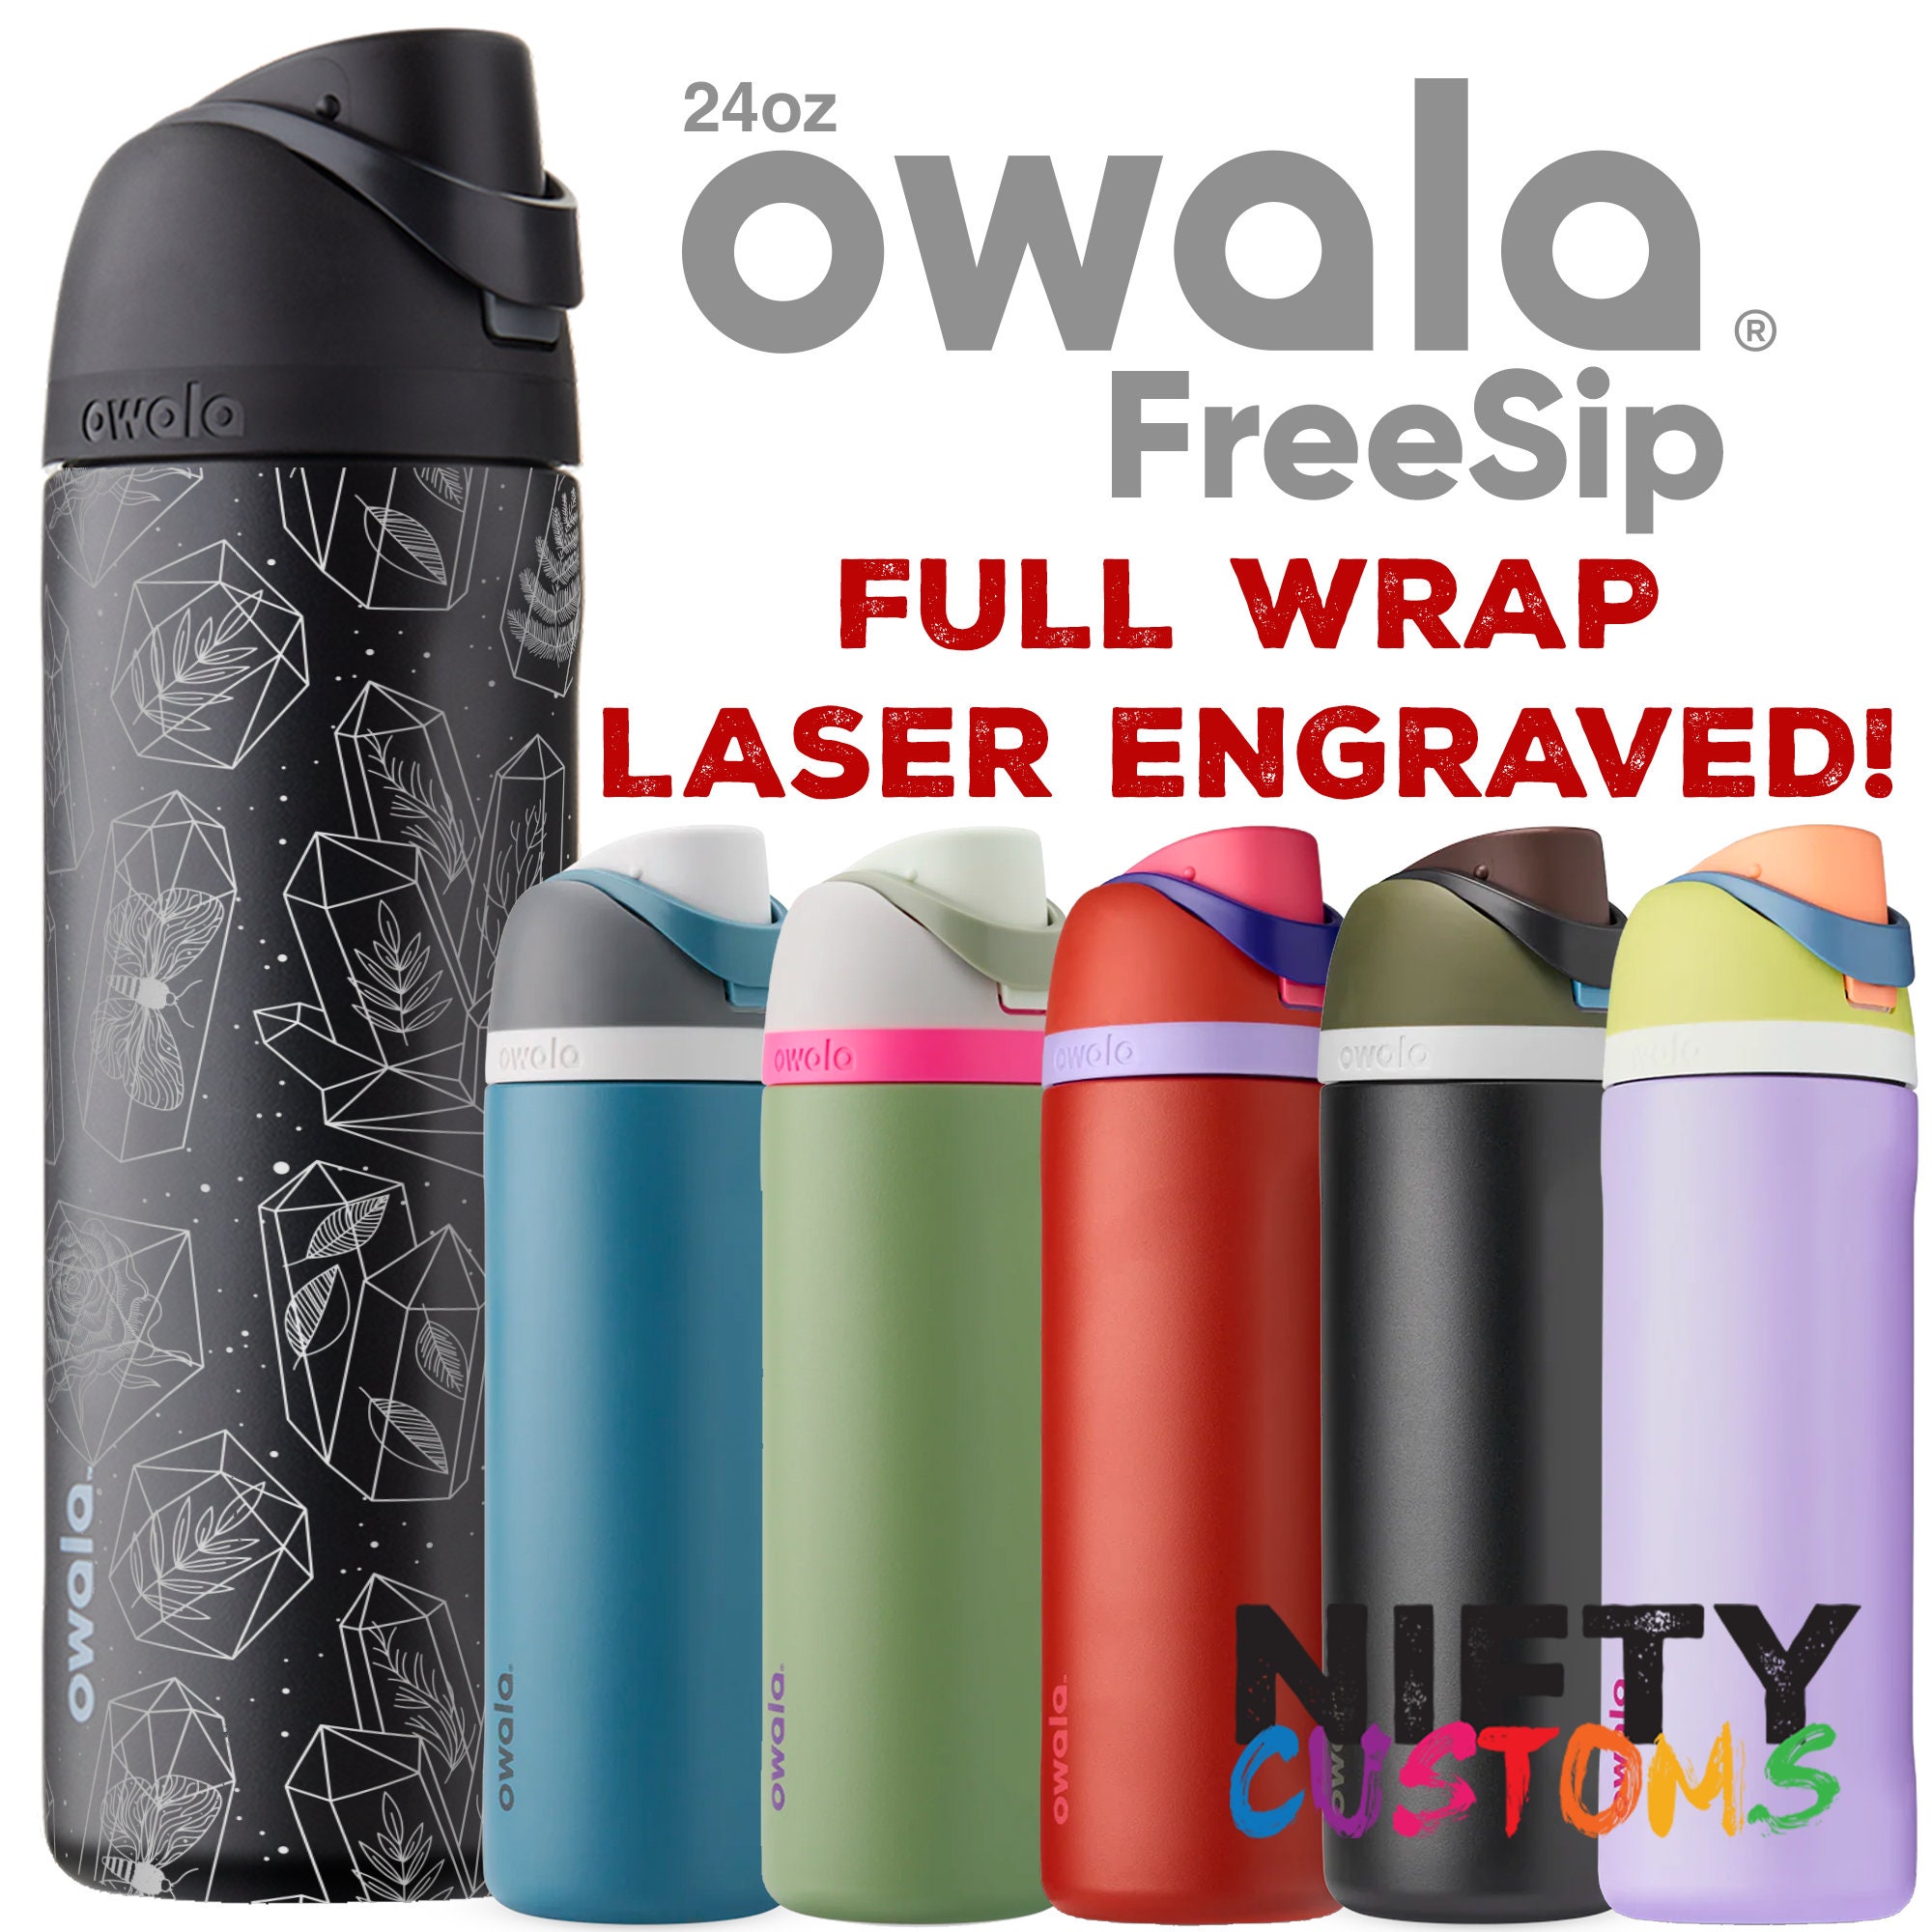 Fate FULL WRAP Owala Freesip Personalized Water Bottle Insulated